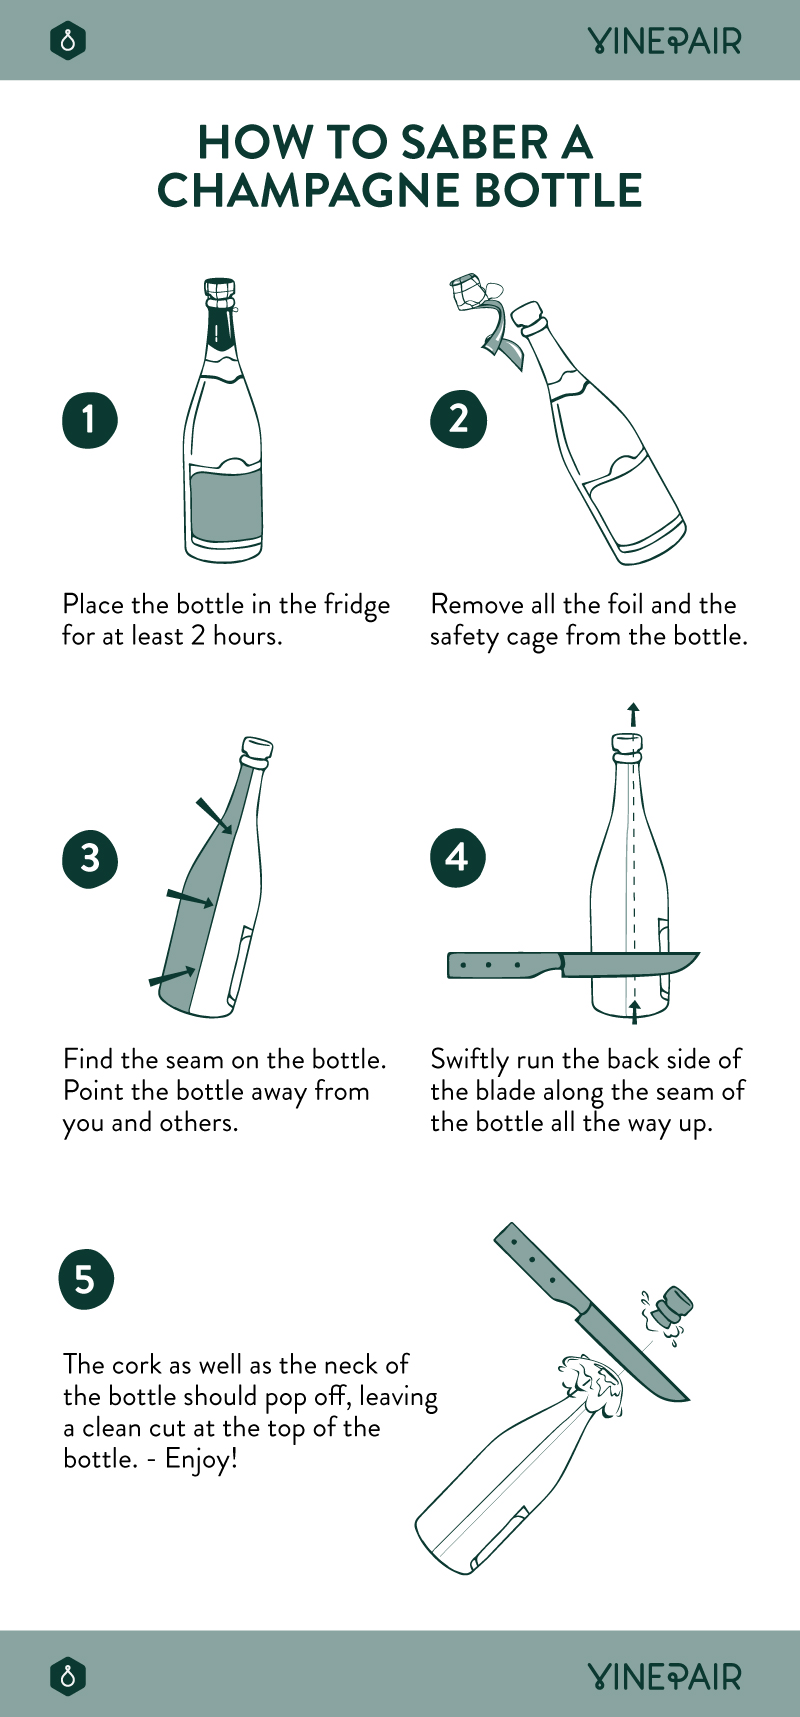 How To Expertly Saber A Bottle Of Champagne [Infographic]